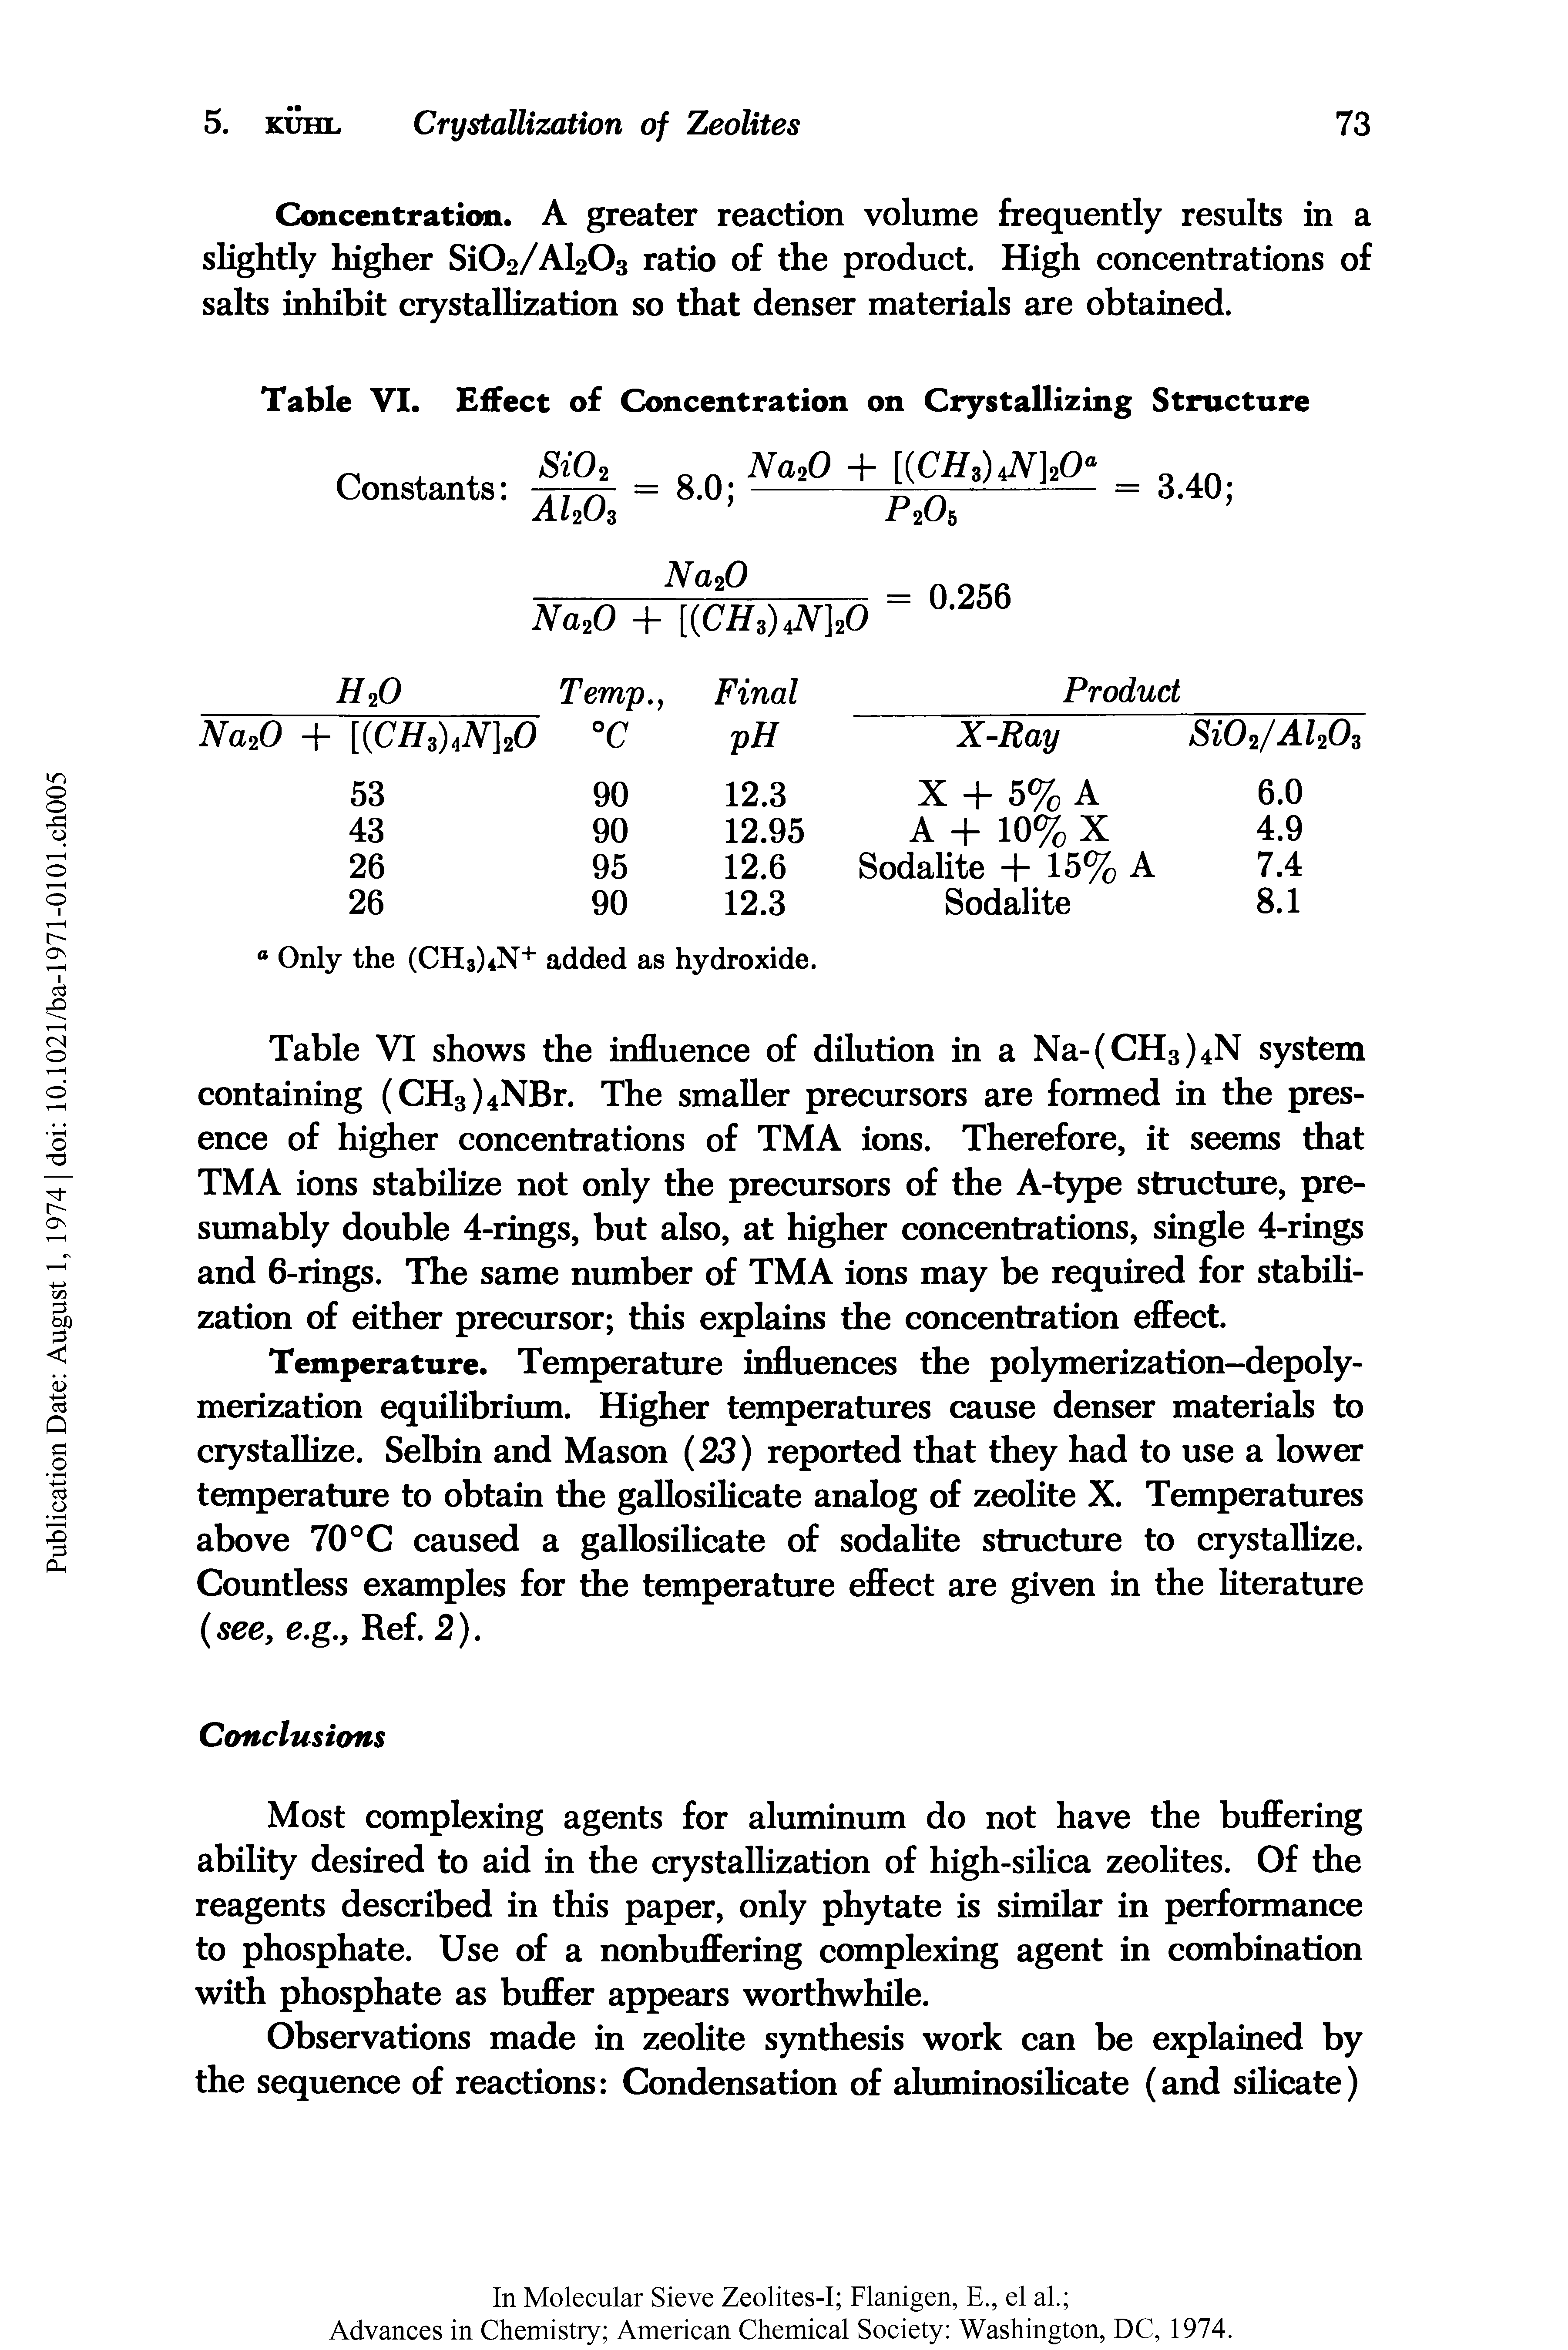 Table VI shows the influence of dilution in a Na-(CH3)4N system containing (CH3)4NBr. The smaller precursors are formed in the presence of higher concentrations of TMA ions. Therefore, it seems that TMA ions stabilize not only the precursors of the A-type structure, presumably double 4-rings, but also, at higher concentrations, single 4-rings and 6-rings. The same number of TMA ions may be required for stabilization of either precursor this explains the concentration effect.